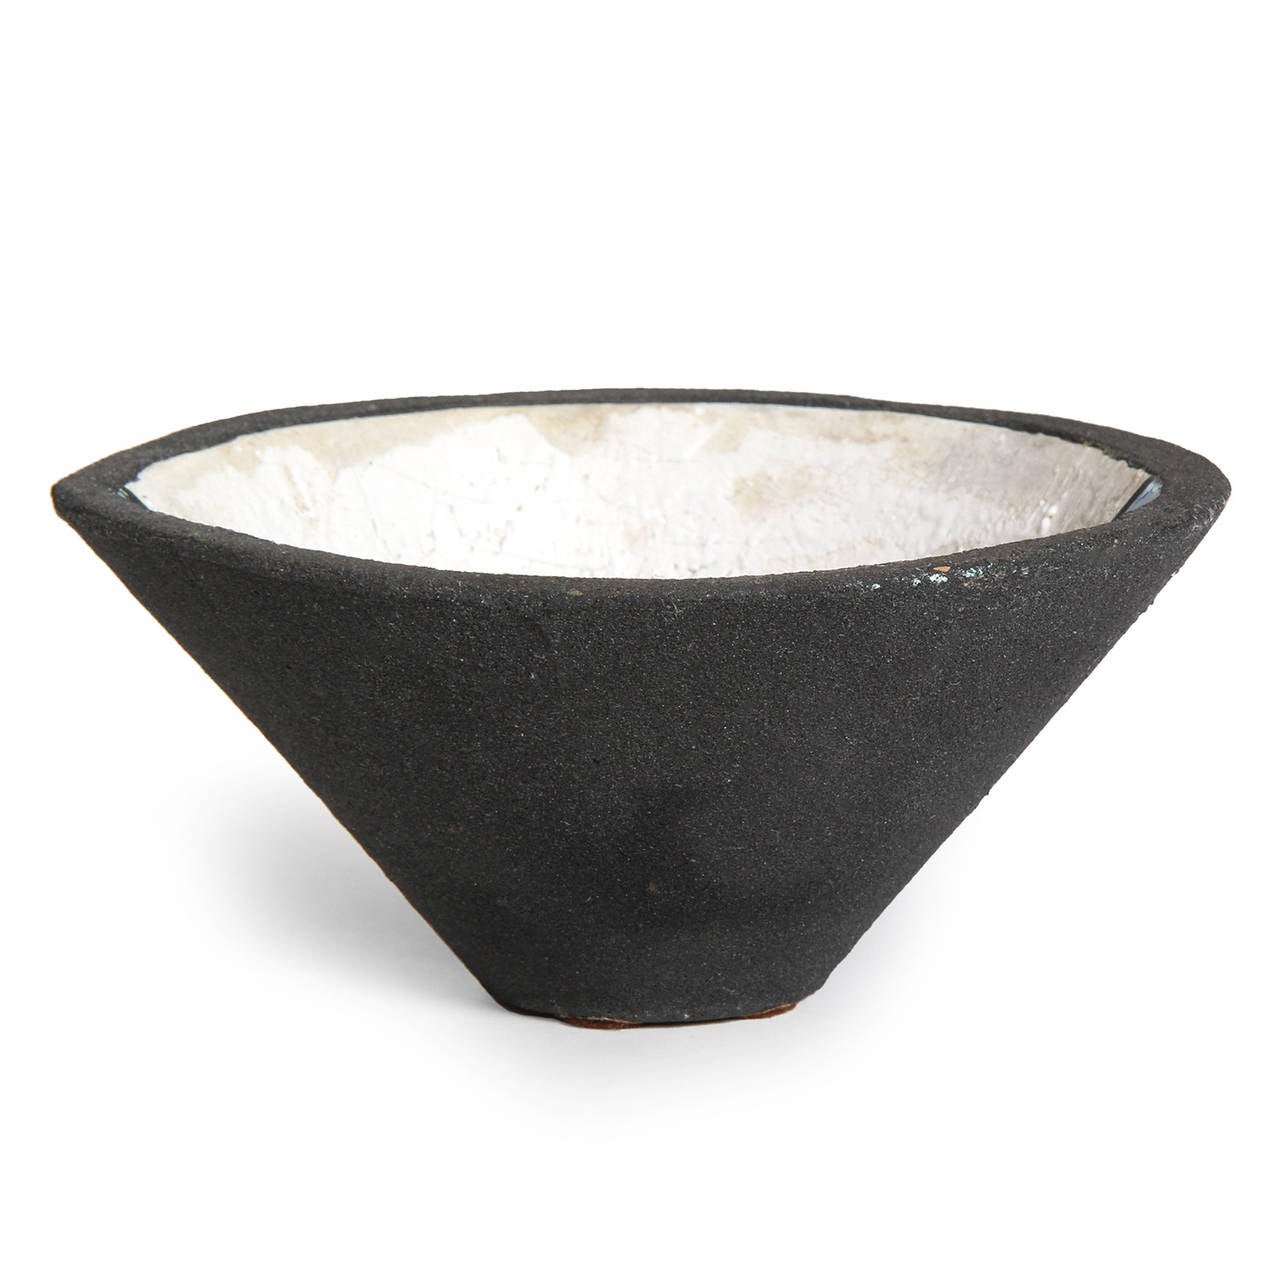 A unique and unusual hand built ceramic bowl having a steeply tapered oval form and covered with a matte black volcanic outer glaze and graphic cobalt blue and white divided interior.